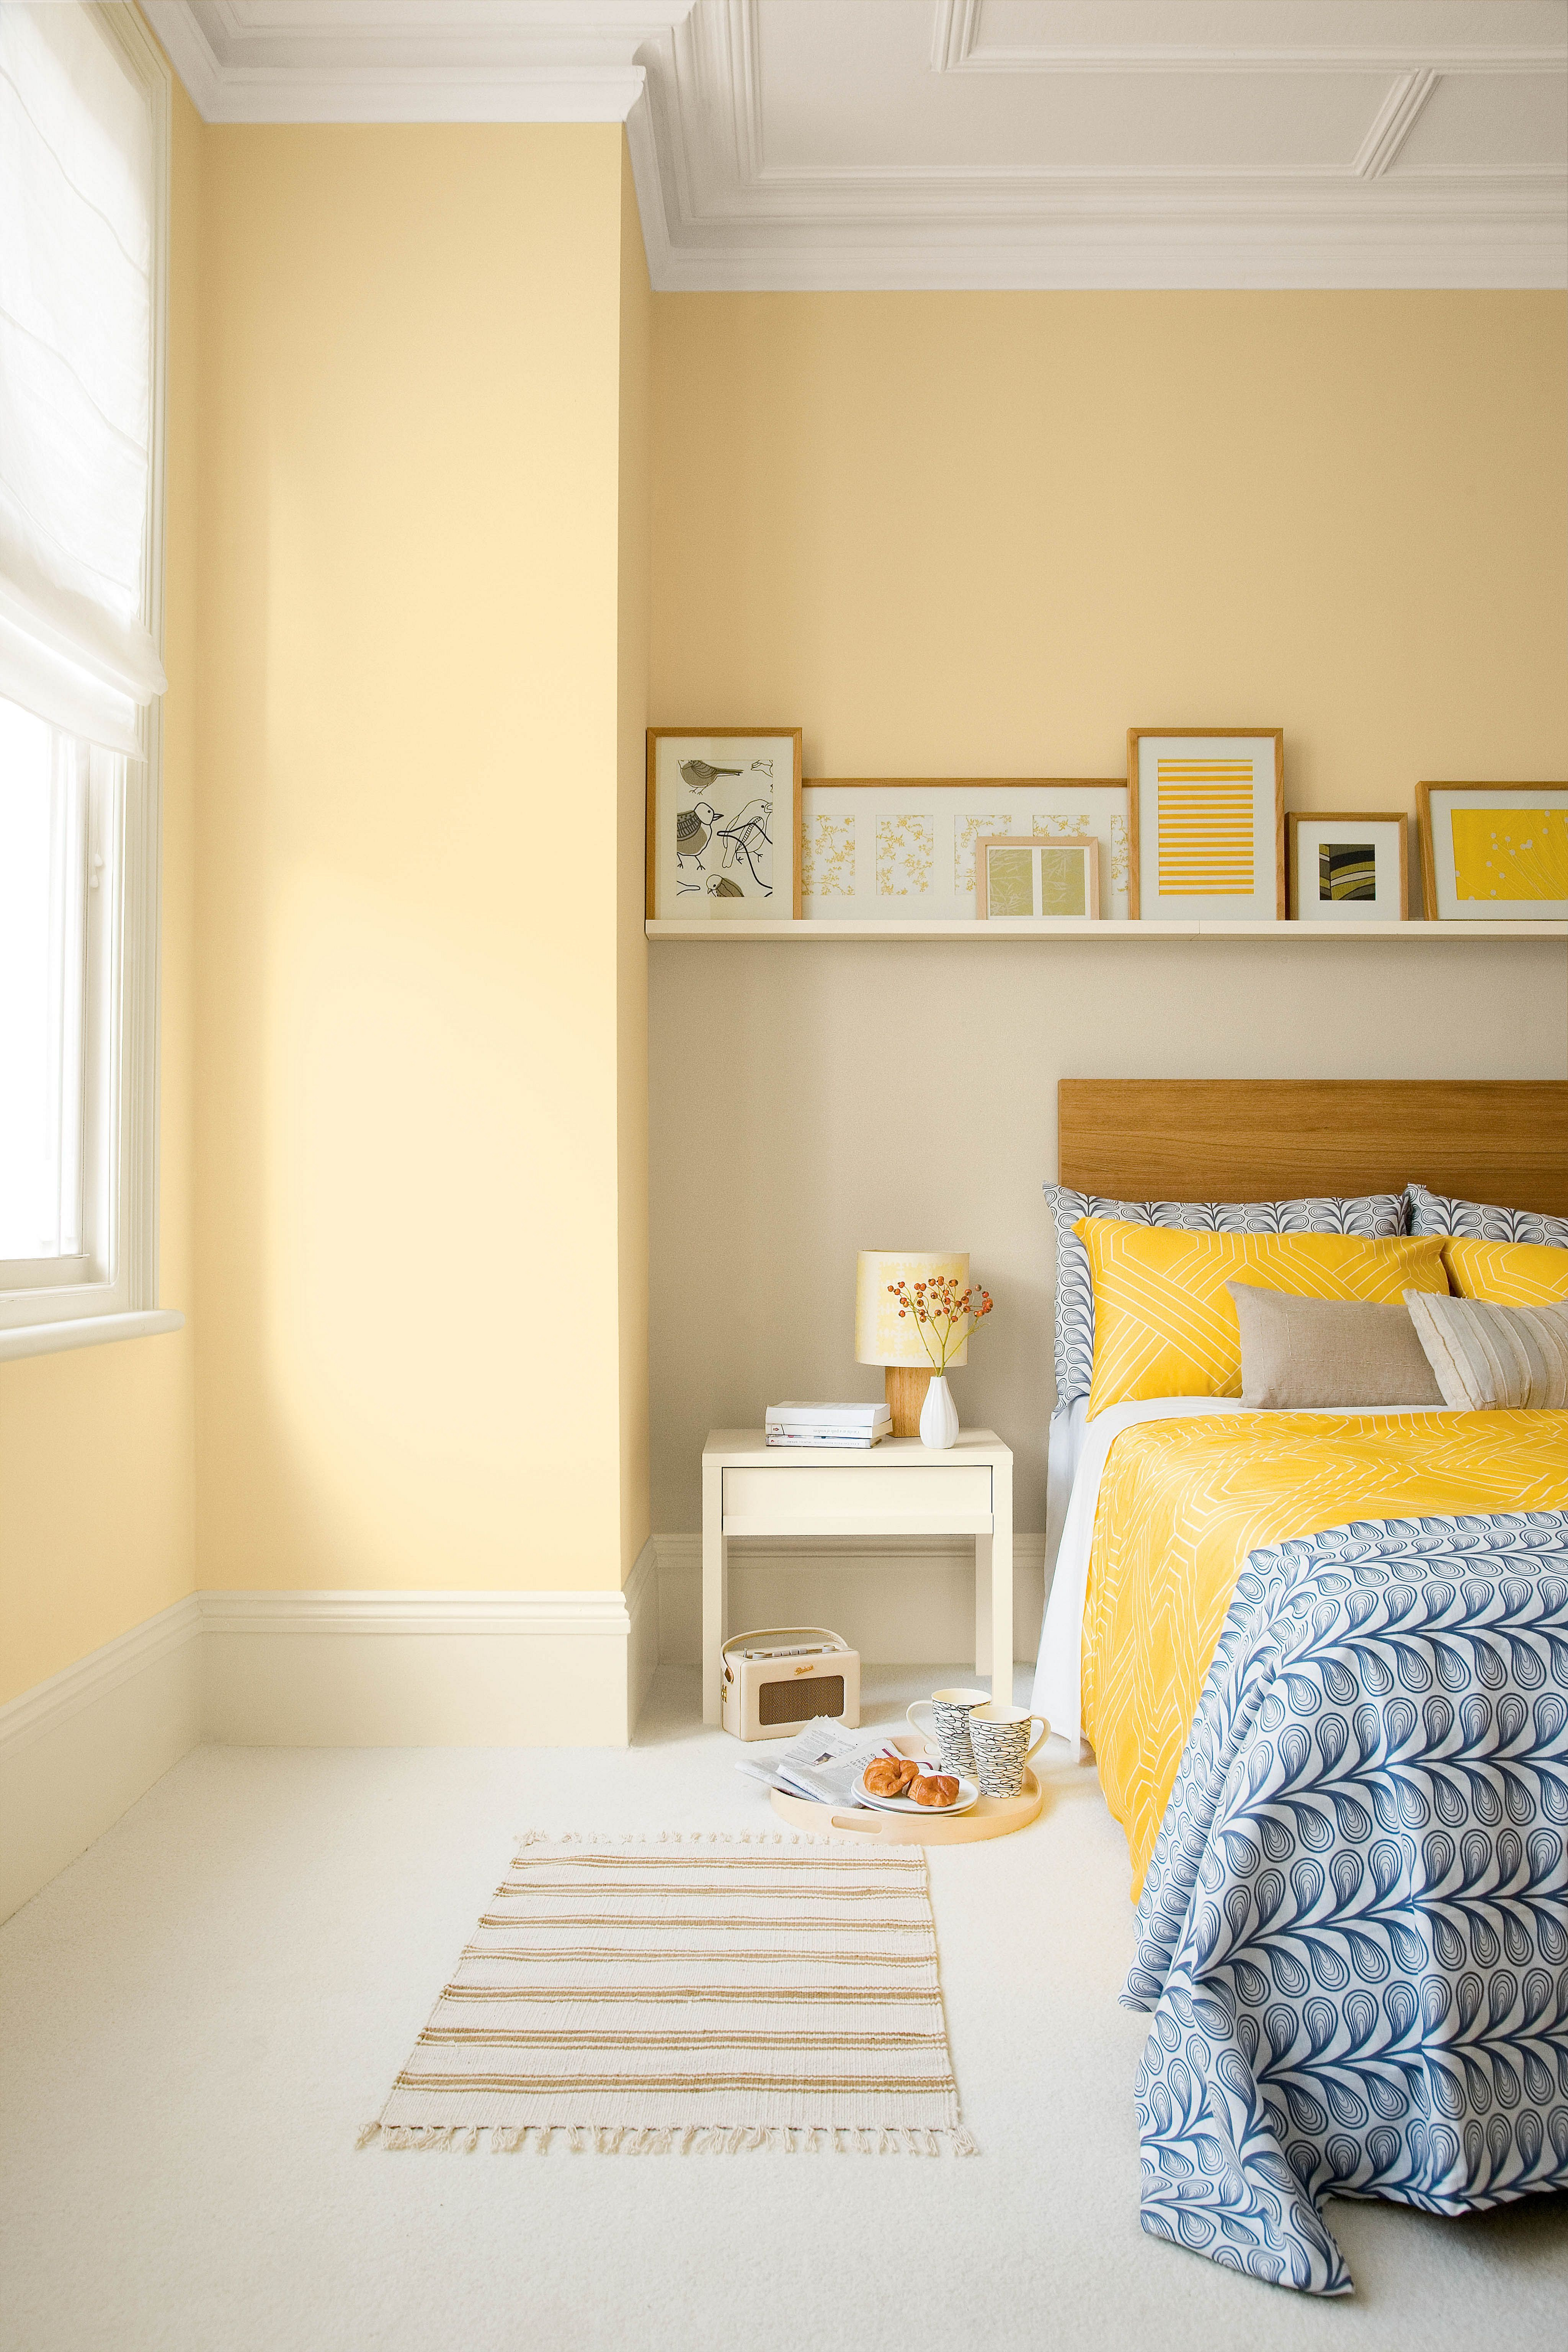 10 Incredible Yellow Aesthetic Bedroom Decorating Ideas Design with sizing 4096 X 6144